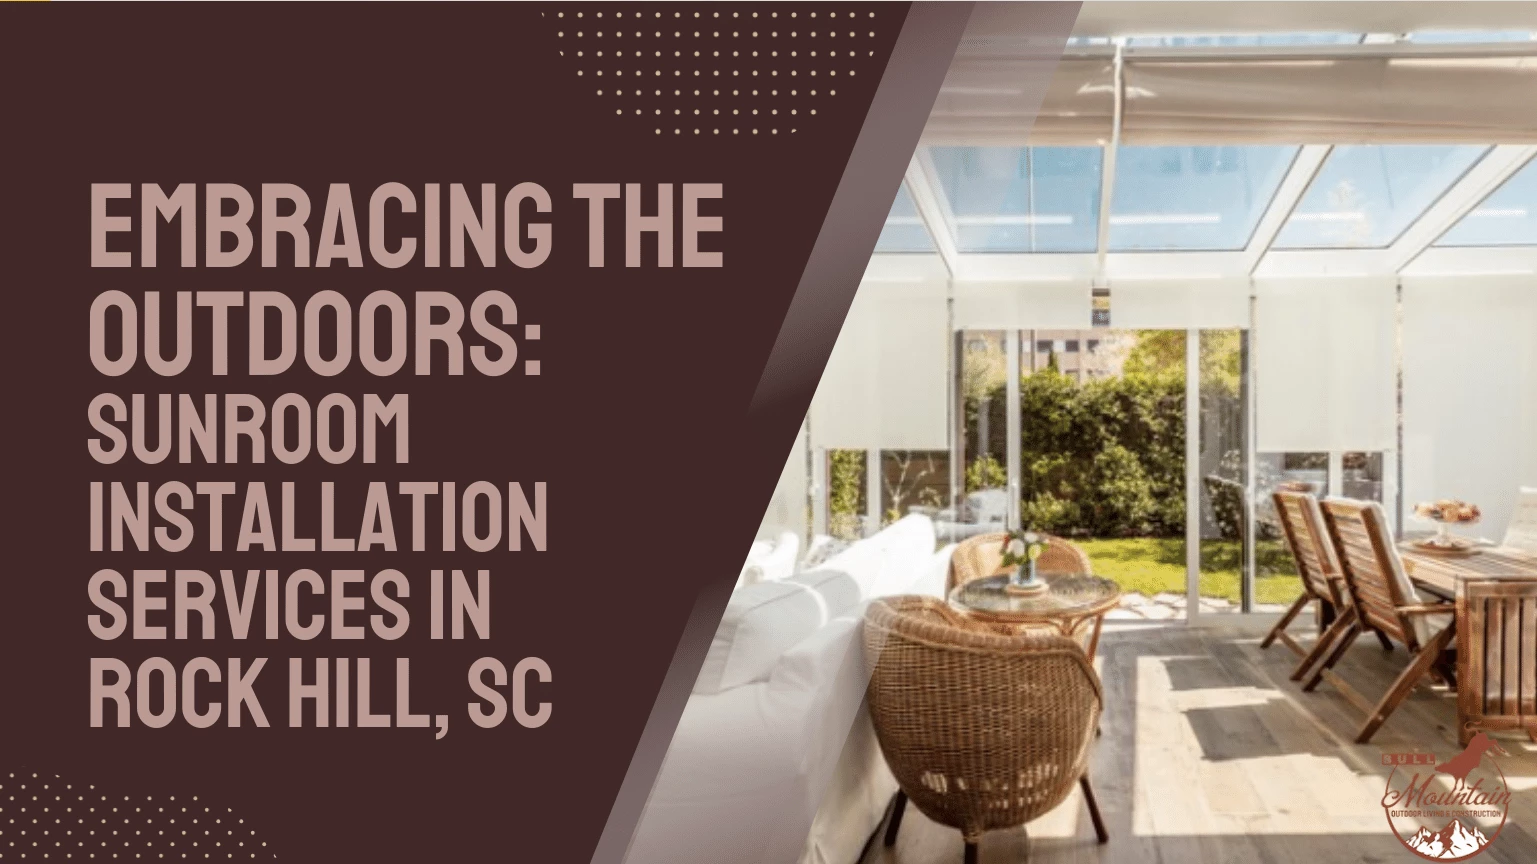 Embracing the Outdoors Sunroom Installation Services in Rock Hill, SC